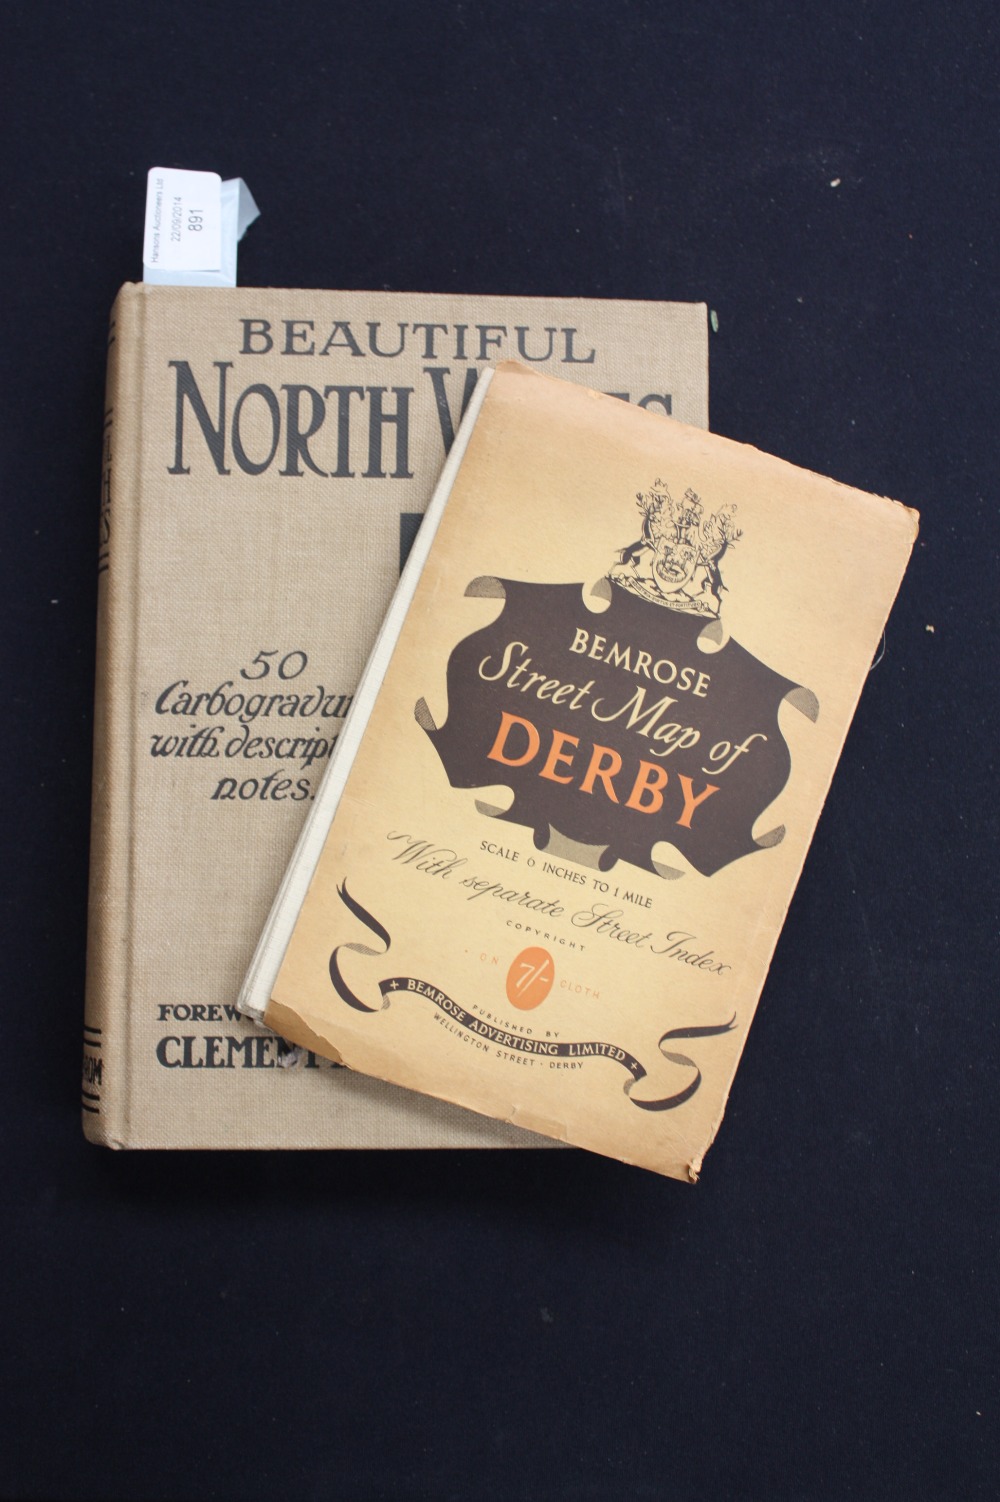 'Beautiful North Wales' fifty carbogravures with descriptive notes, forward by Clement K Shorter,